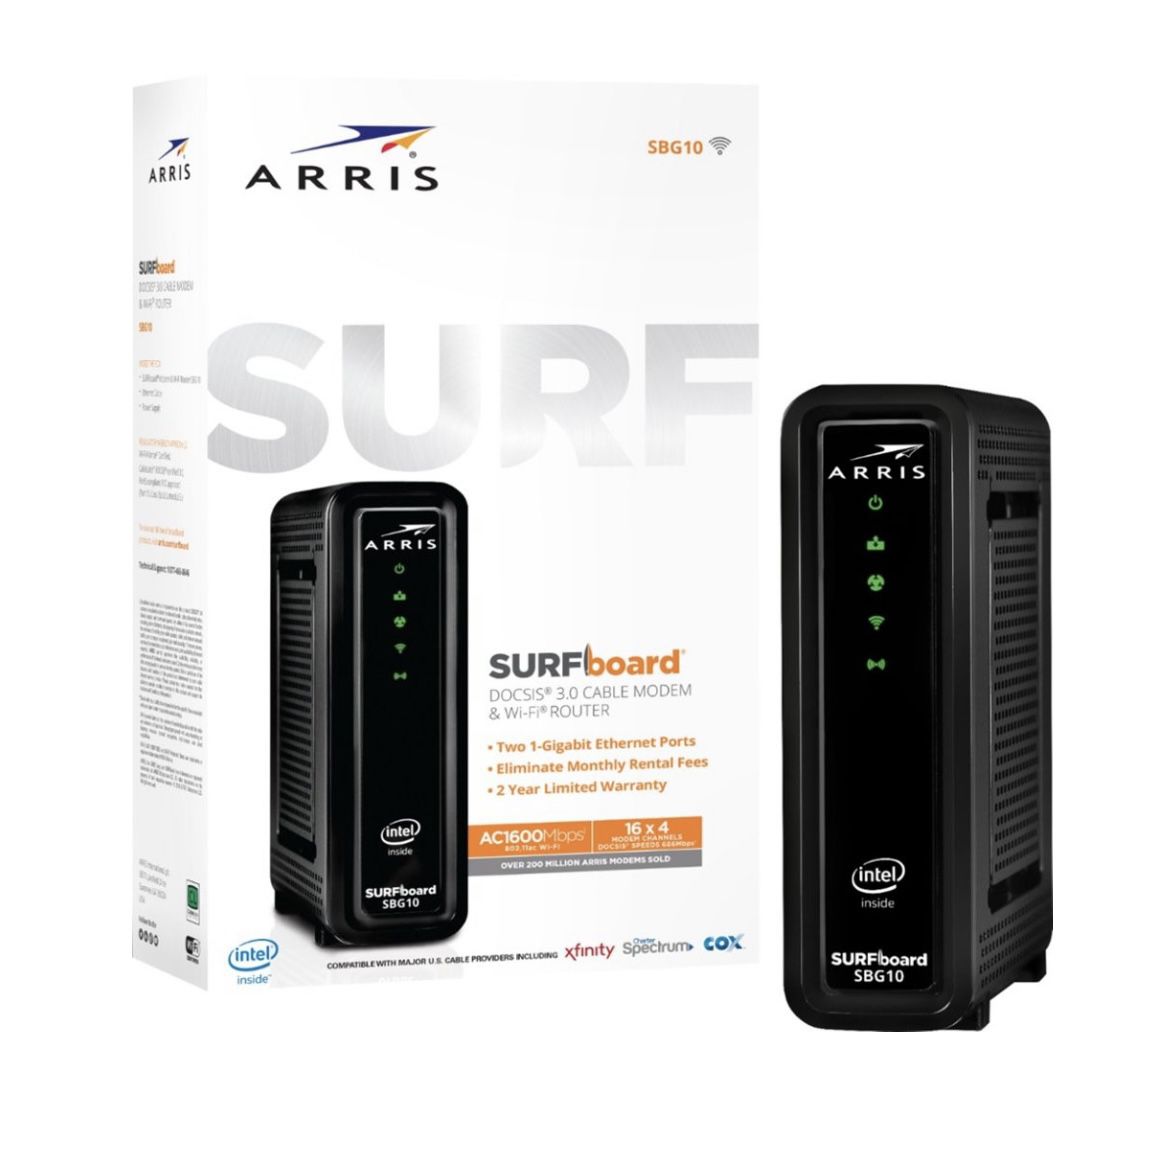 Arris Surfboard Dual Band Router